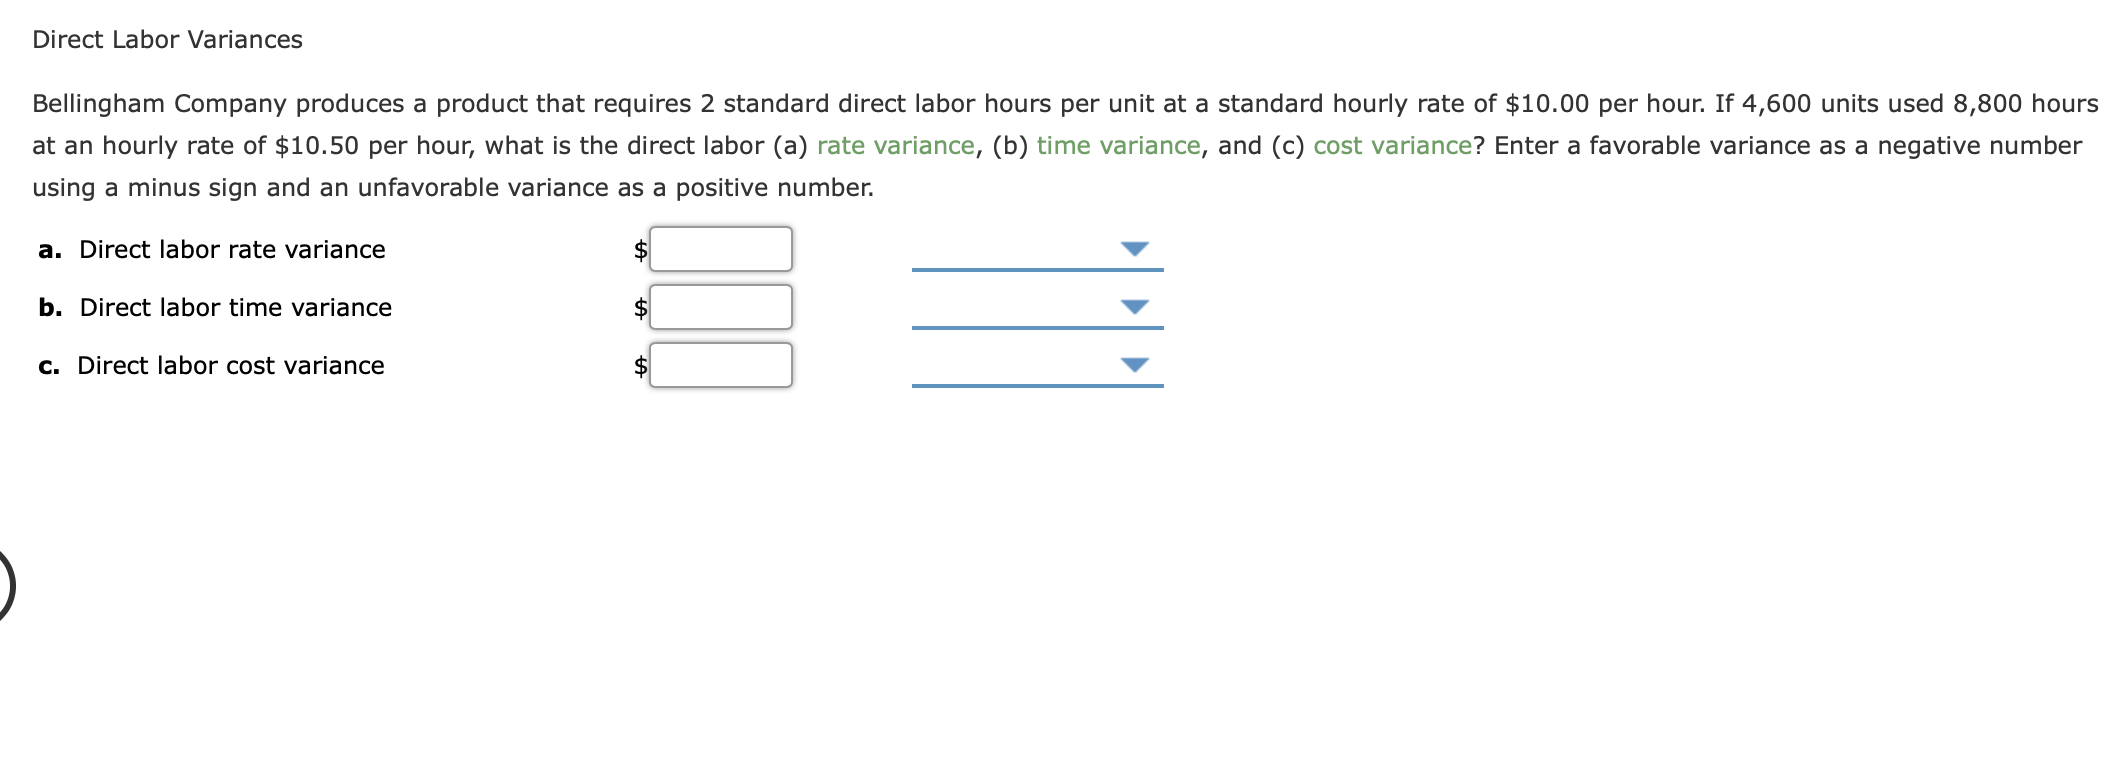 Bellingham Company produces a product that requires 2 standard direct labor hours per unit at a standard hourly rate of $10.00 per hour. If 4,600 units used 8,800 hours
at an hourly rate of $10.50 per hour, what is the direct labor (a) rate variance, (b) time variance, and (c) cost variance? Enter a favorable variance as a negative number
using a minus sign and an unfavorable variance as a positive number.
a. Direct labor rate variance
b. Direct labor time variance
2$
c. Direct labor cost variance
